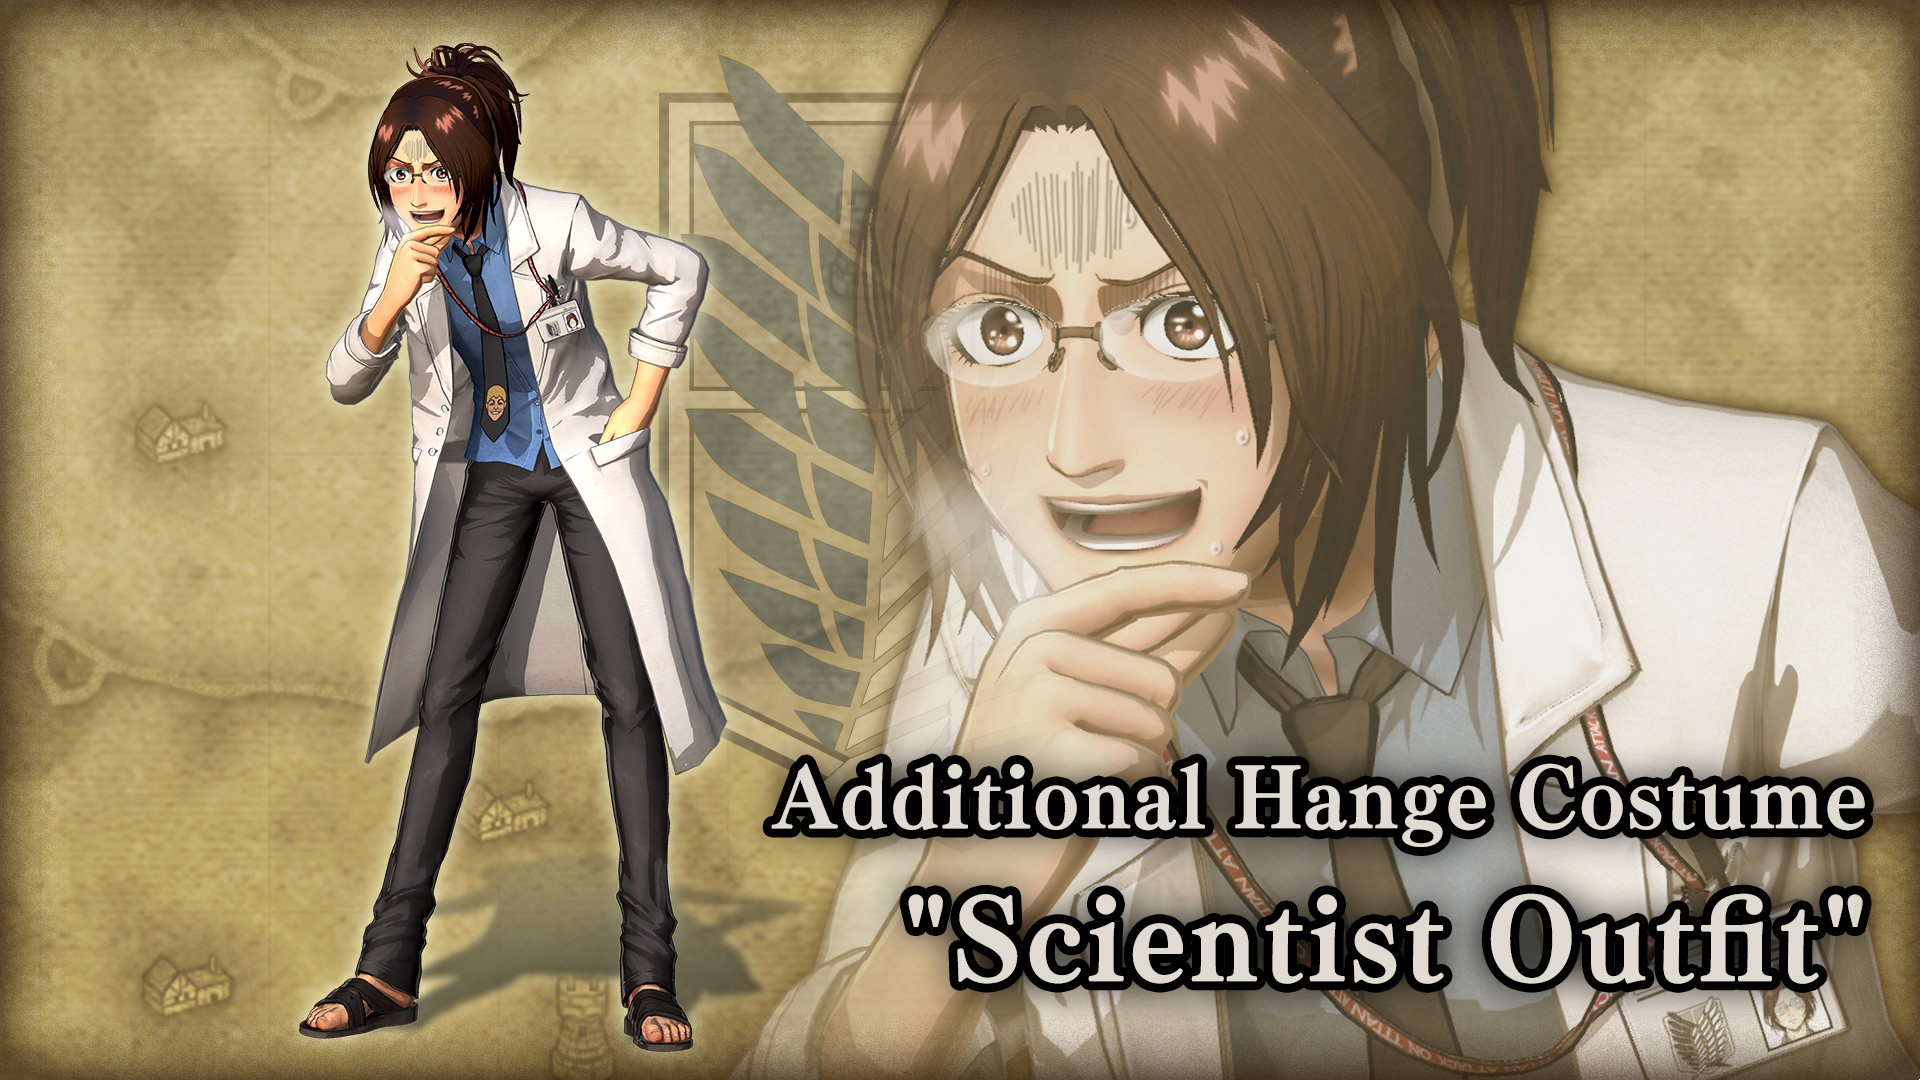 Additional Hange Costume: "Scientist Outfit"